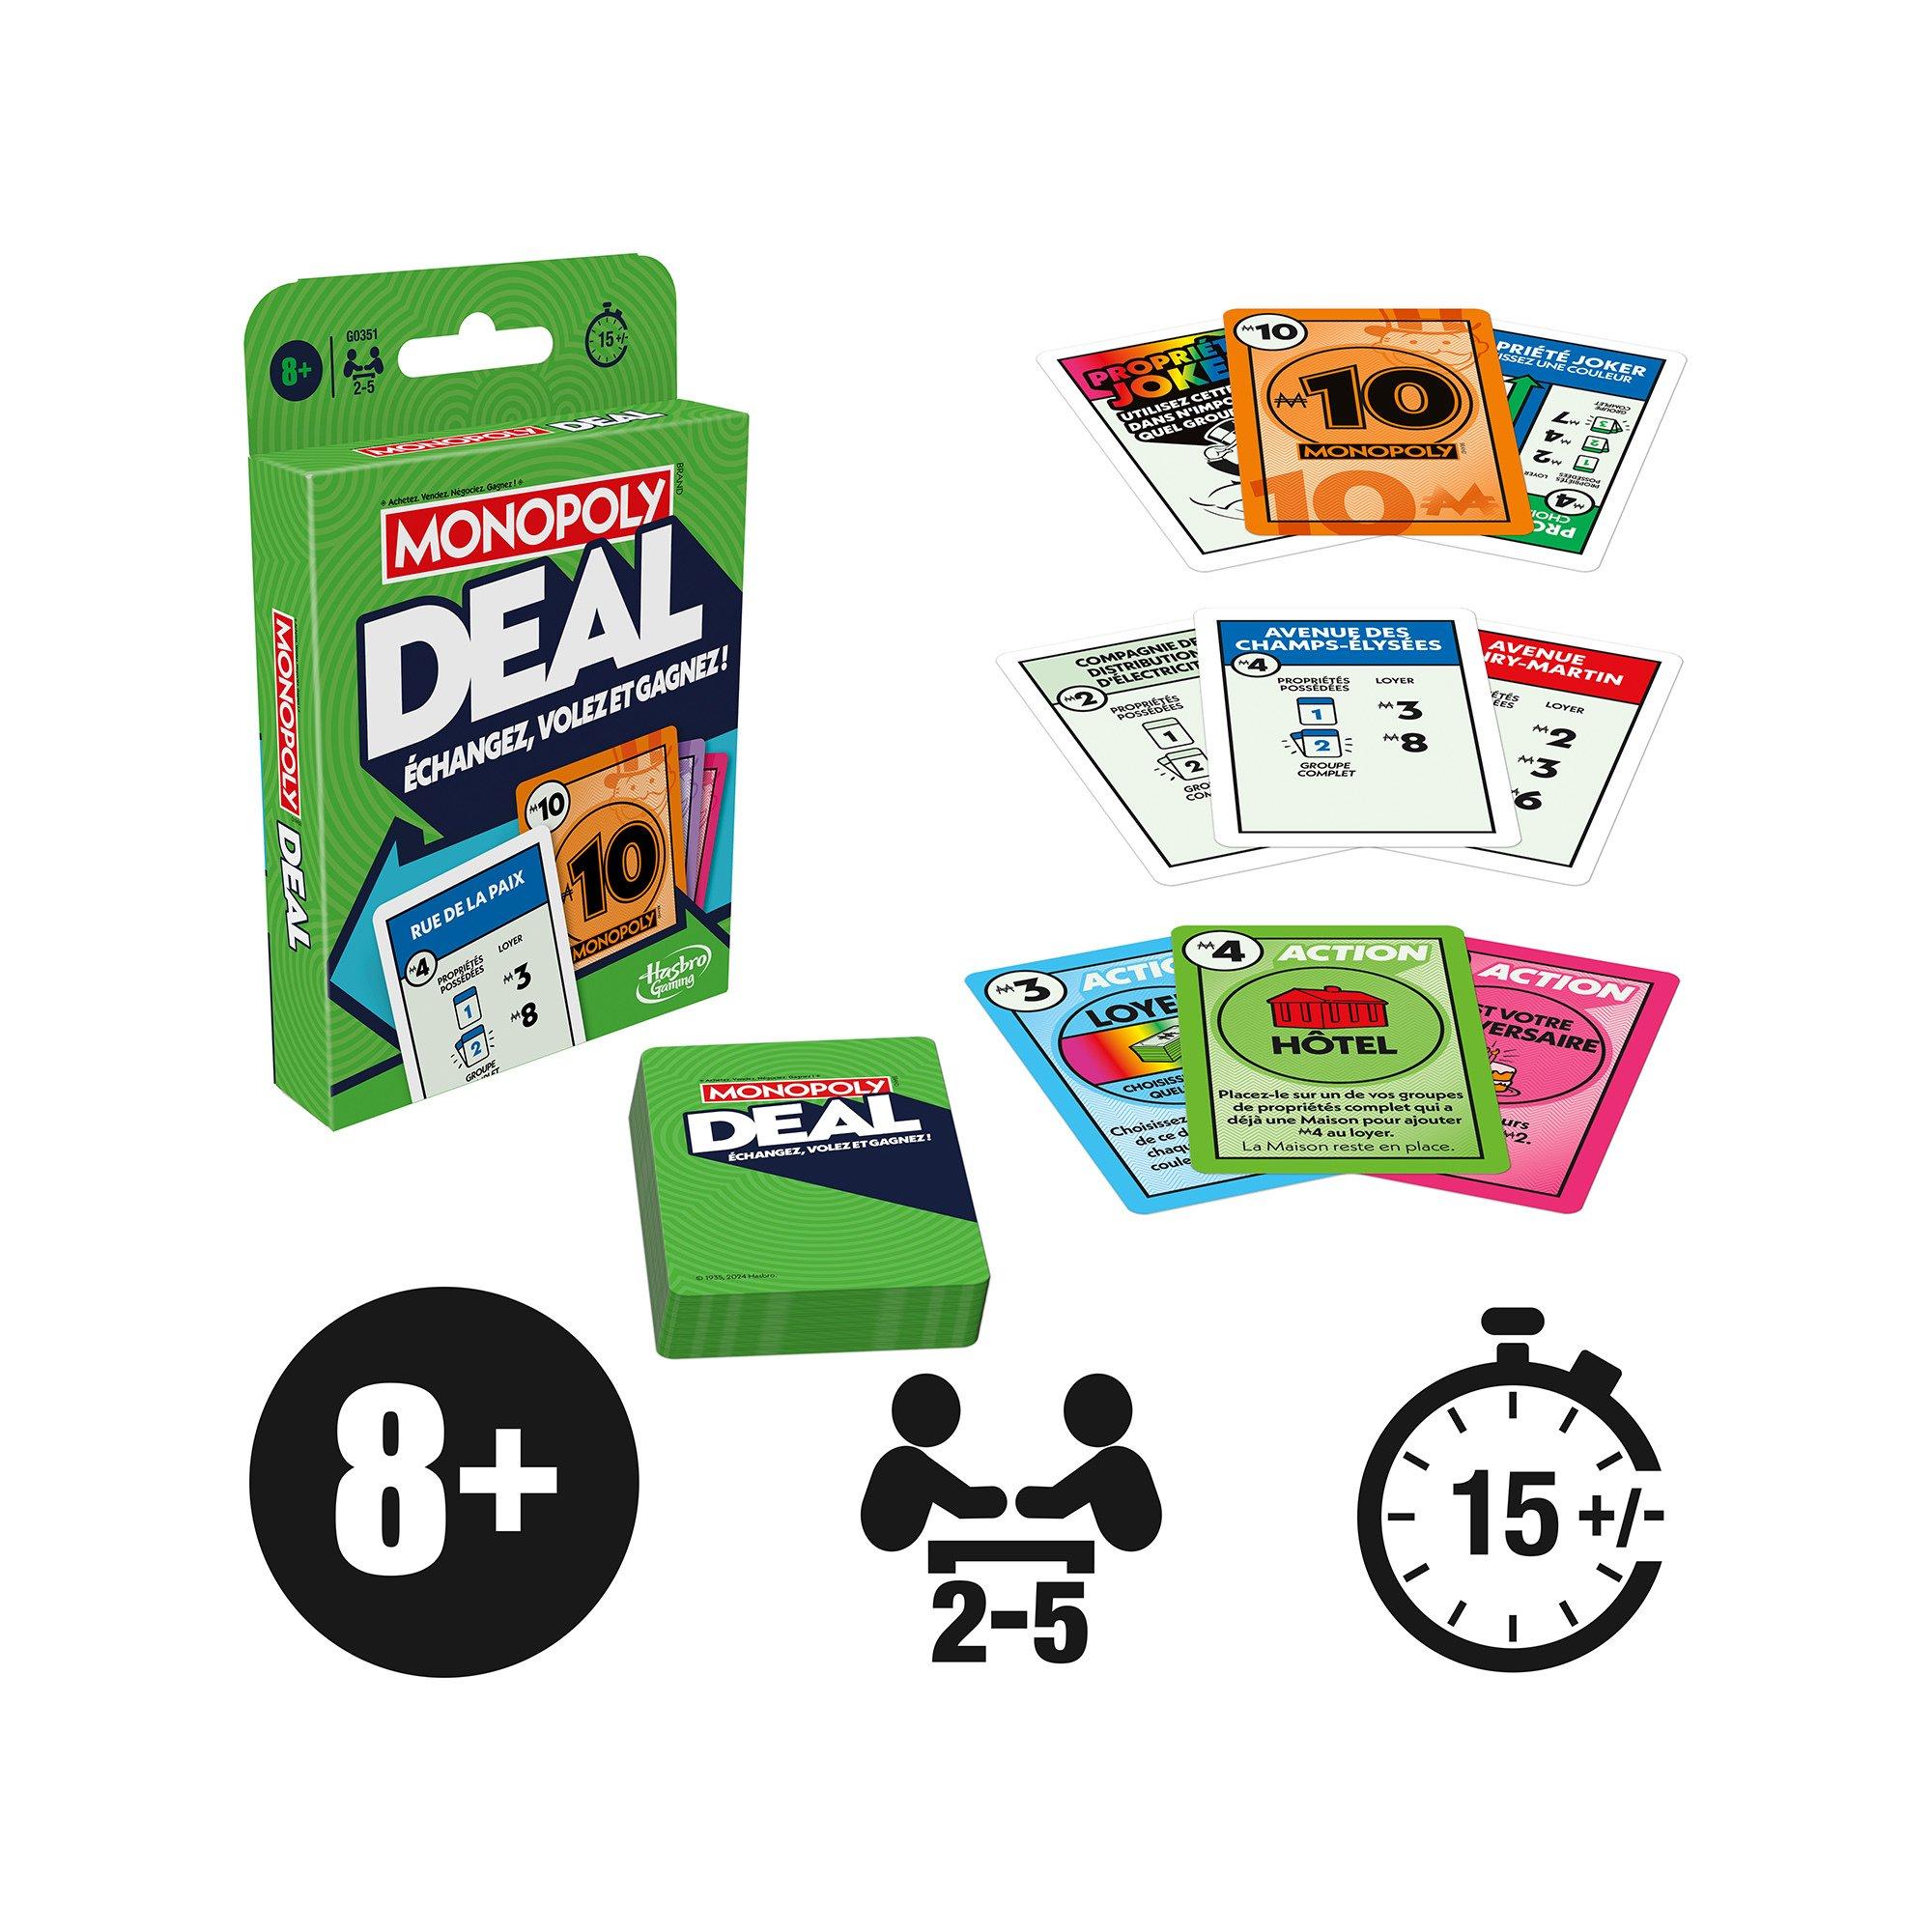 Monopoly  Monopoly Deal, Francese 